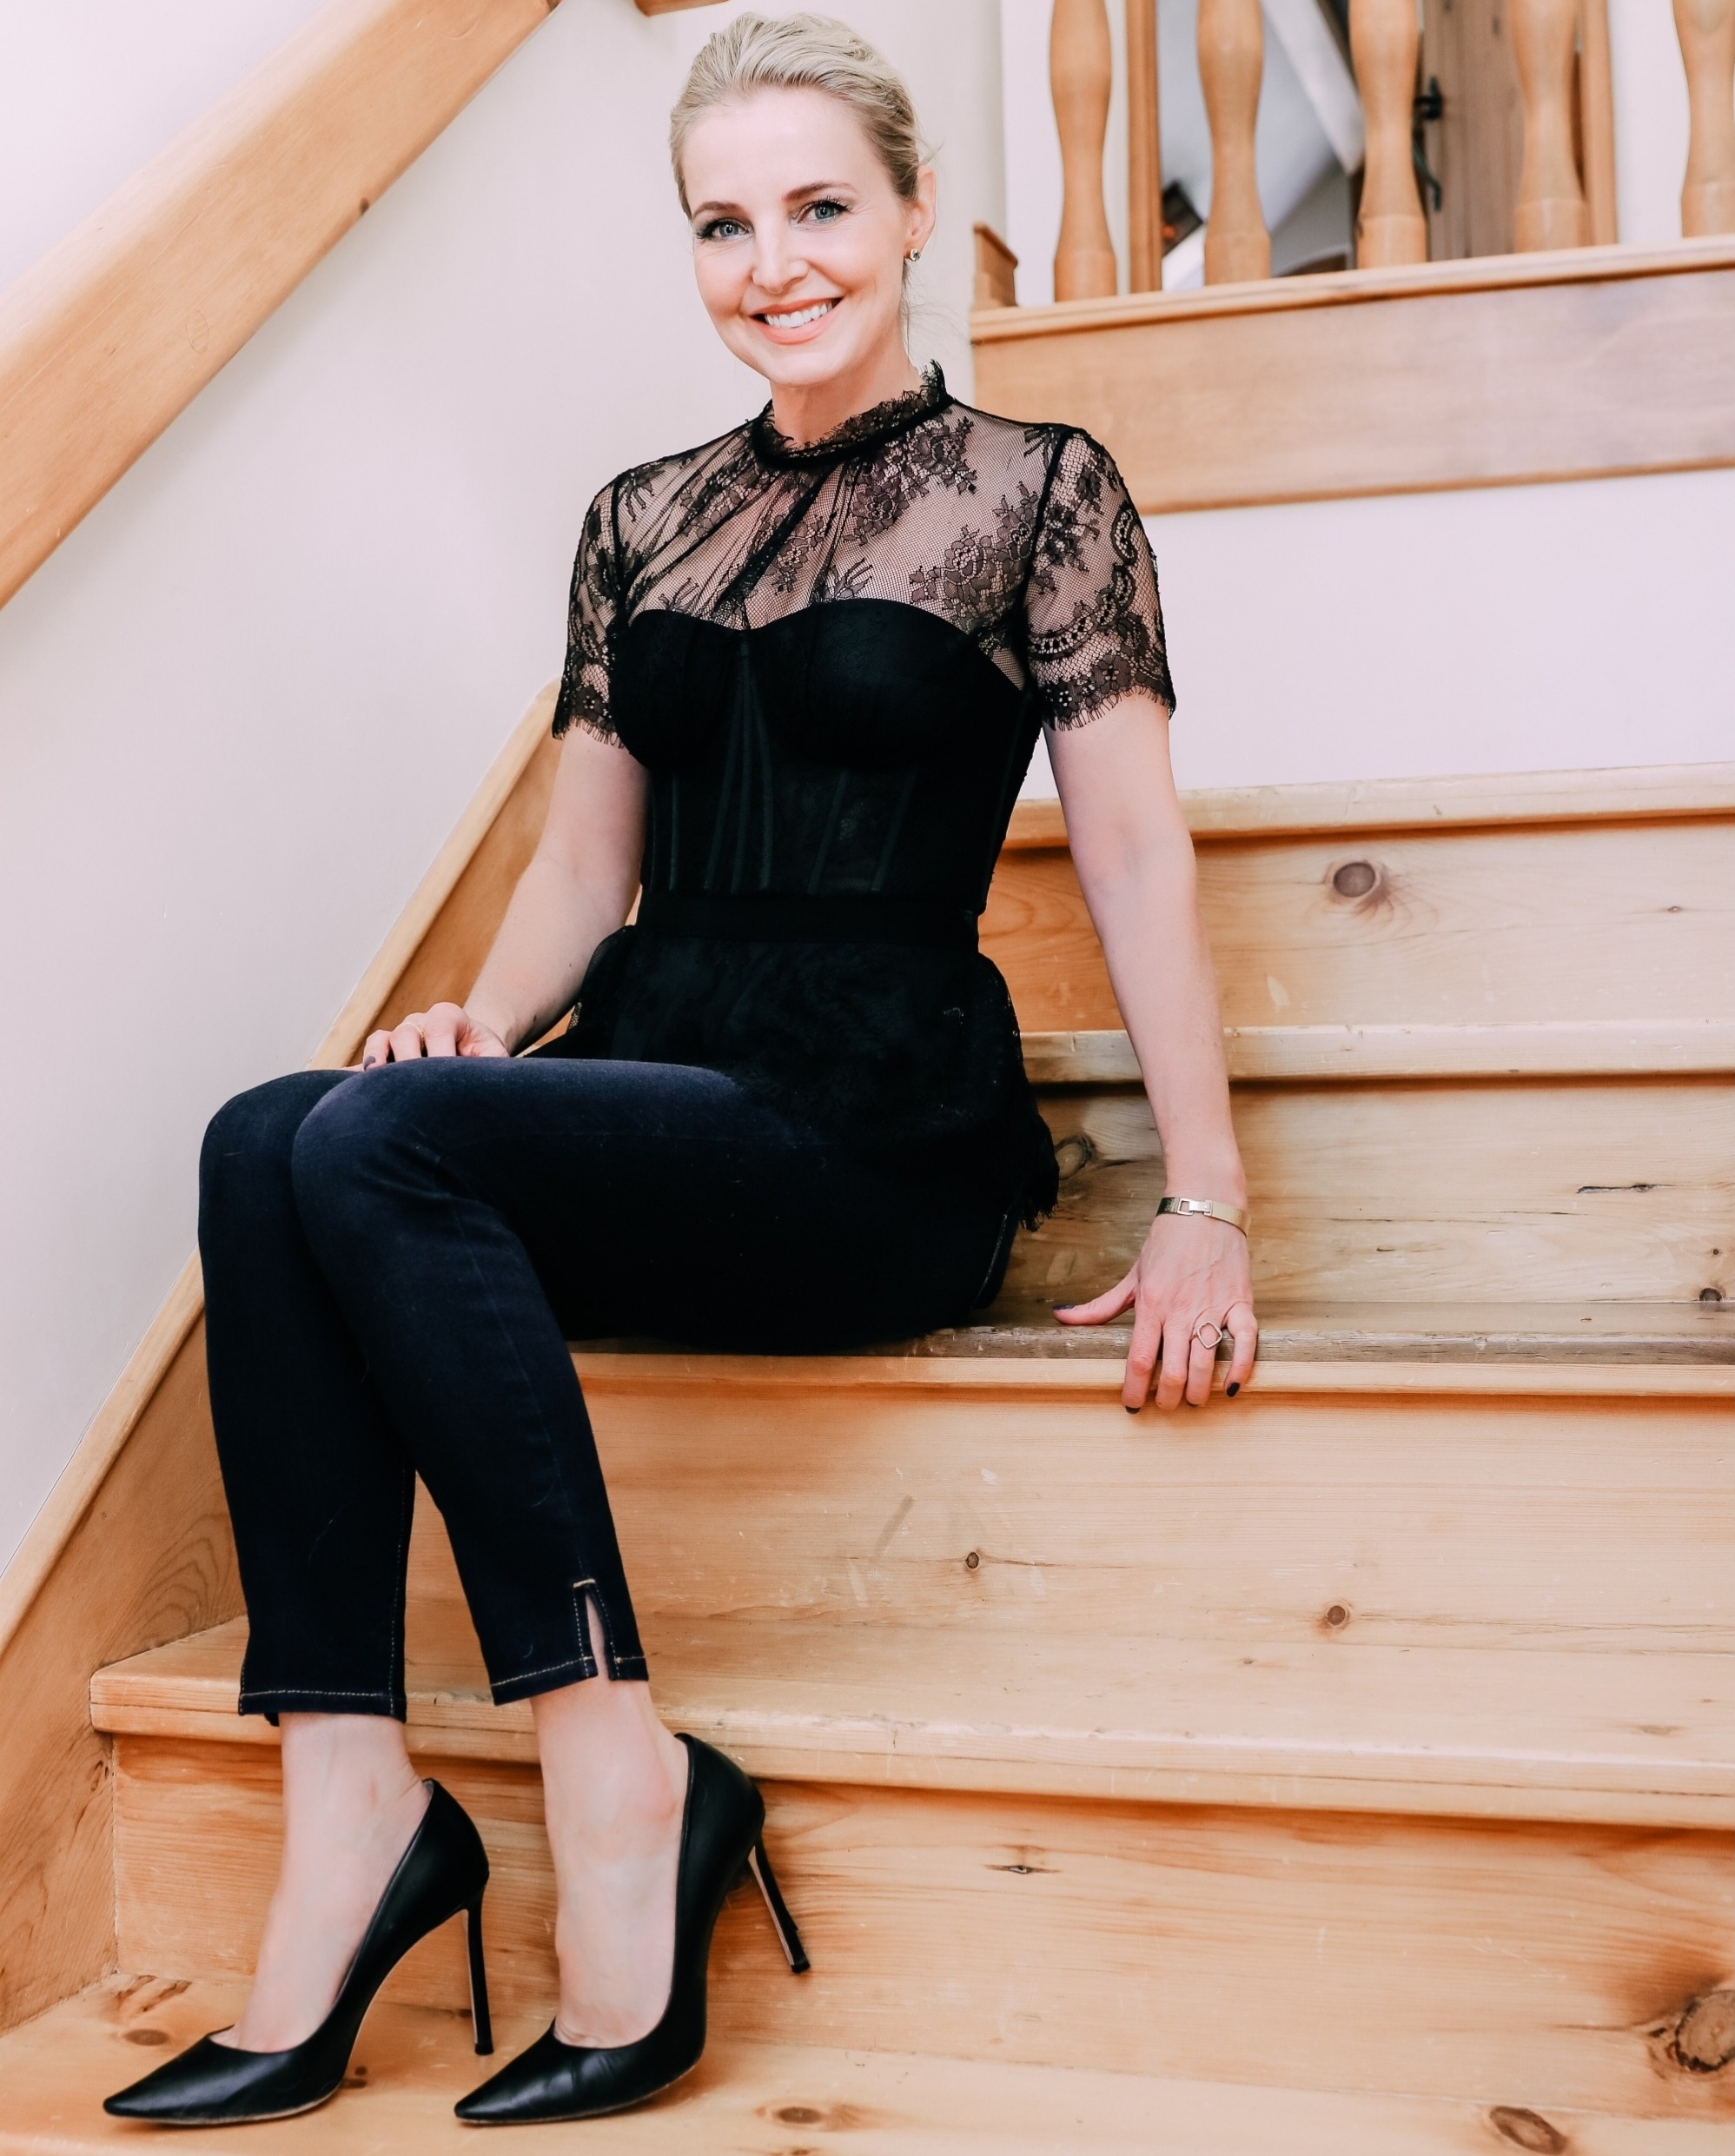 what shoes to wear with jeans featuring Jimmy Choo Romy pumps in black leather paired with dark wash skinny jeans and a black lace corset top by Jonathan Simkhai on fashion over 40 blogger Erin Busbee